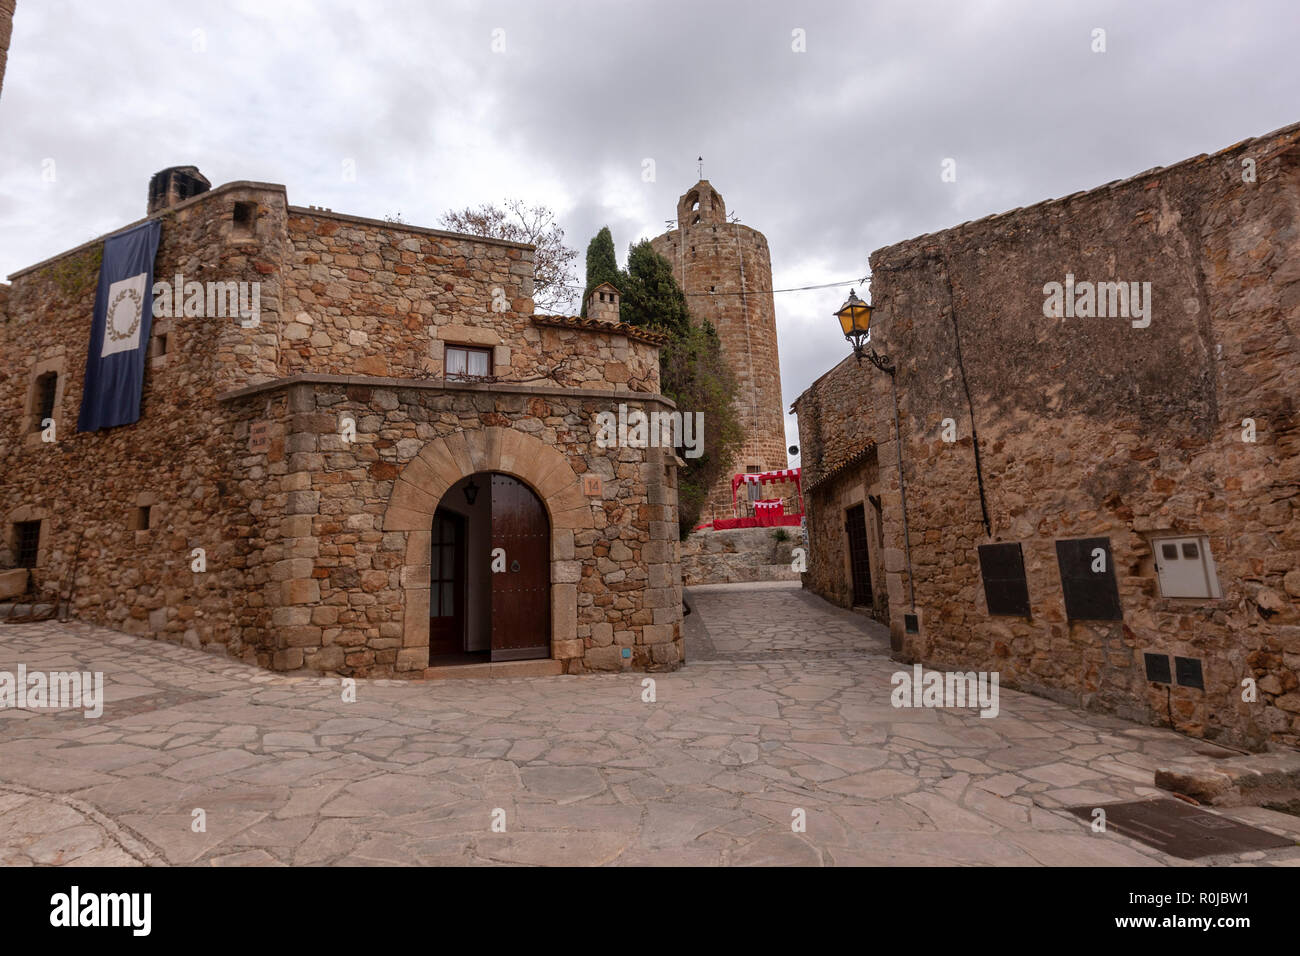 Pals a medieval town with stone houses and a medieval Romanesque tower in Girona Province, Catalonia, Spain Stock Photo